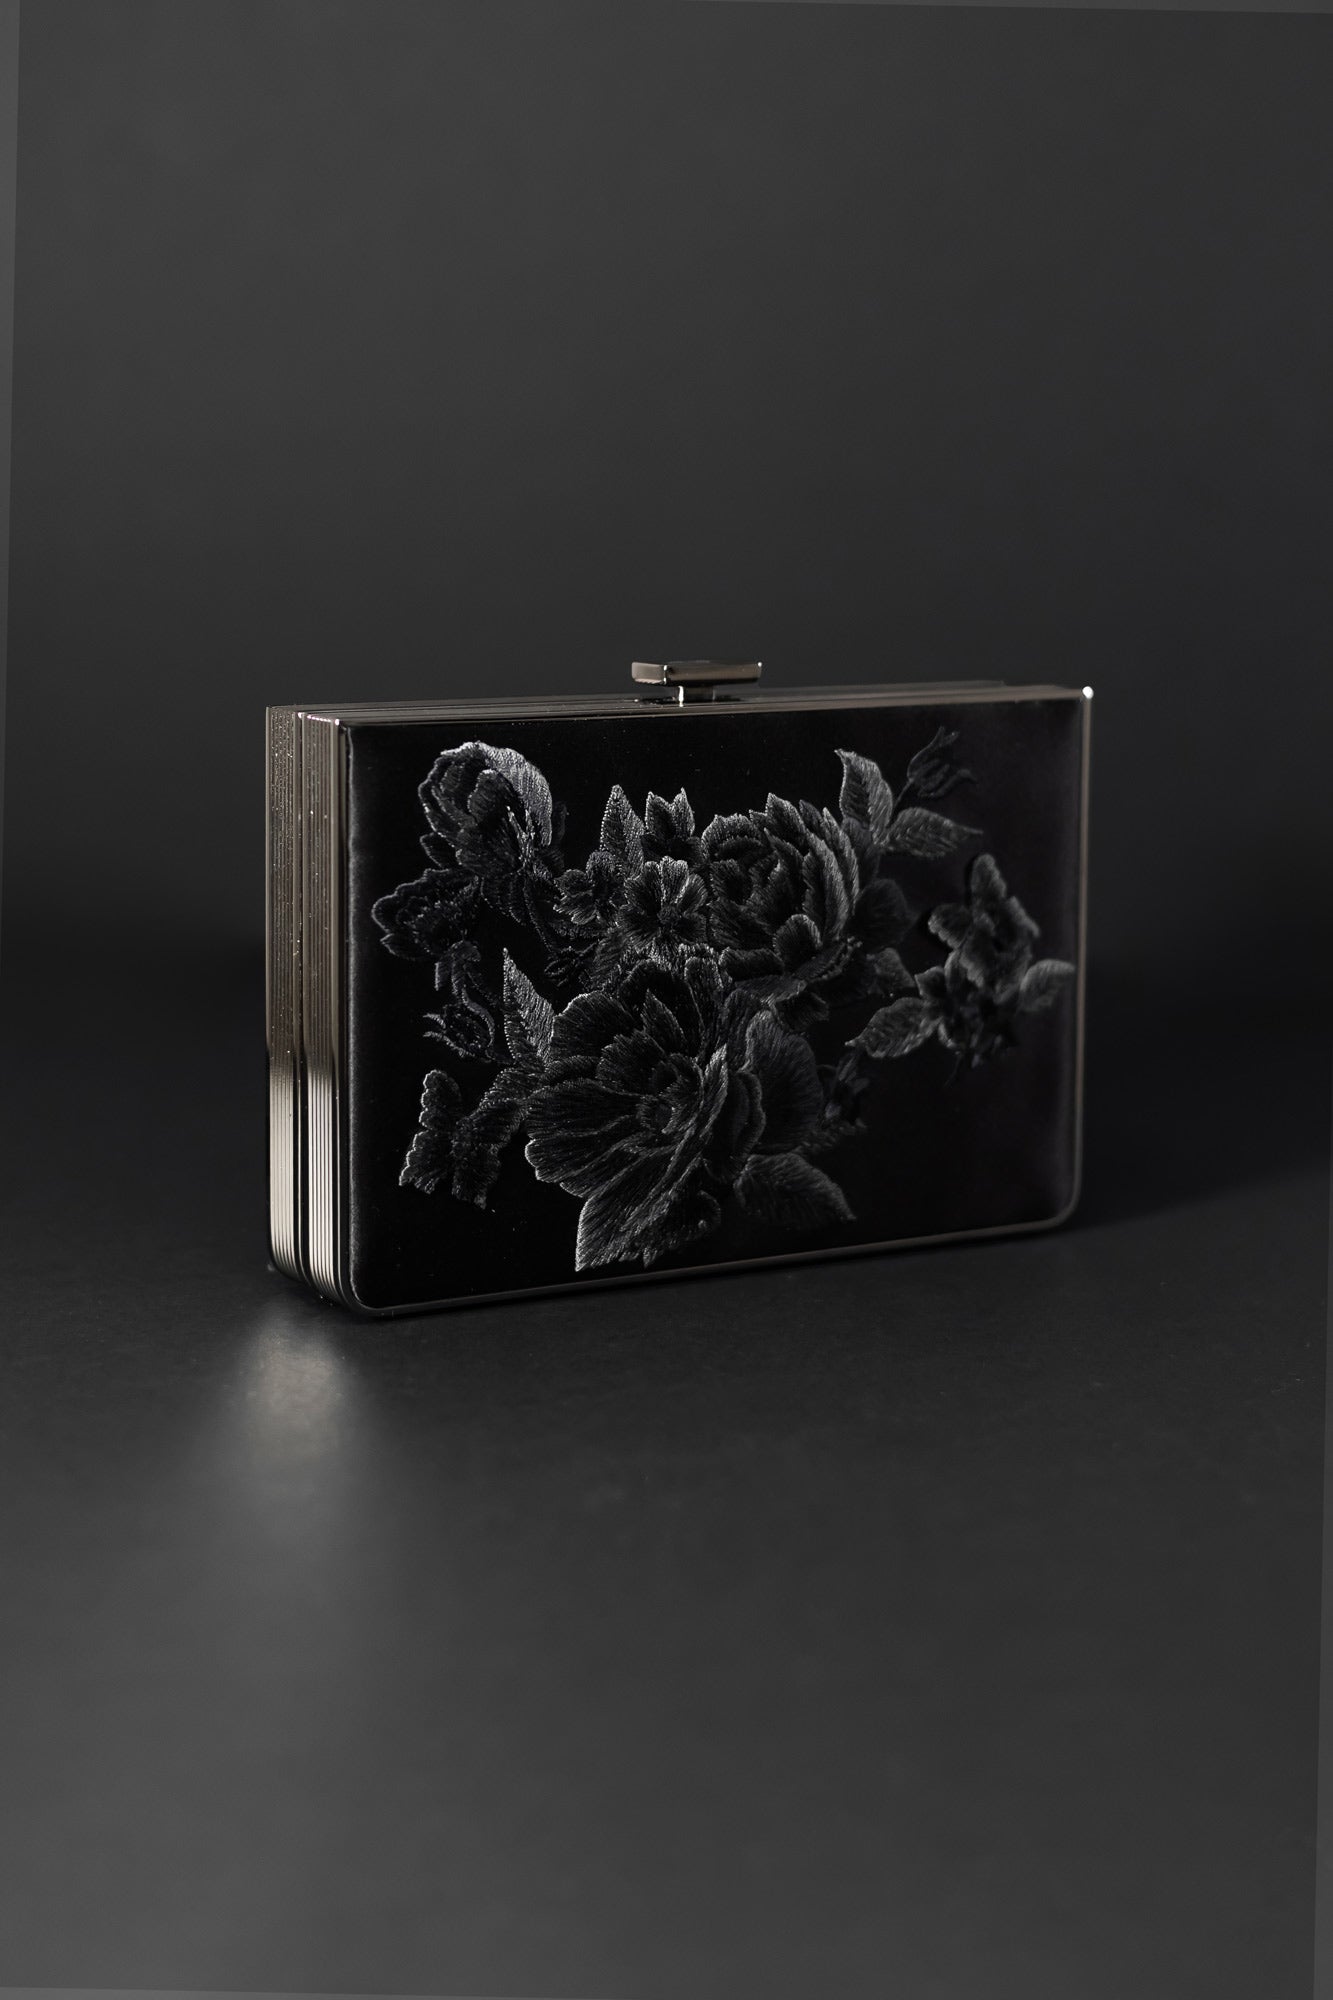 A black purse with Floral Embroidery on it.
Product Name: Venezia Clutch x MICAELA - Black Satin Floral Embroidery
Brand Name: The Bella Rosa Collection